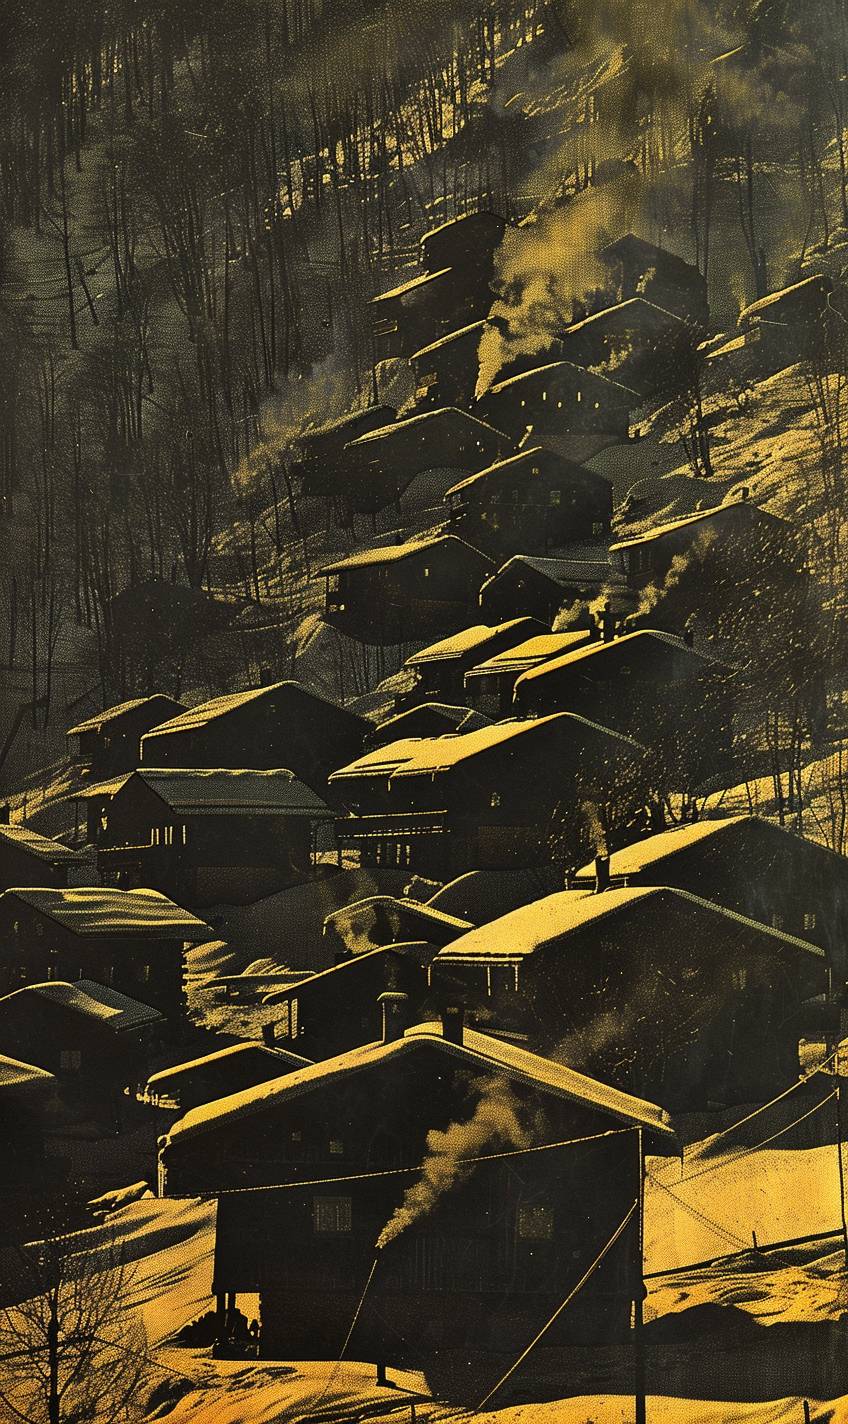 Snow-covered mountain village during winter, cozy wooden houses, smoke rising from chimneys, soft twilight casting a magical glow